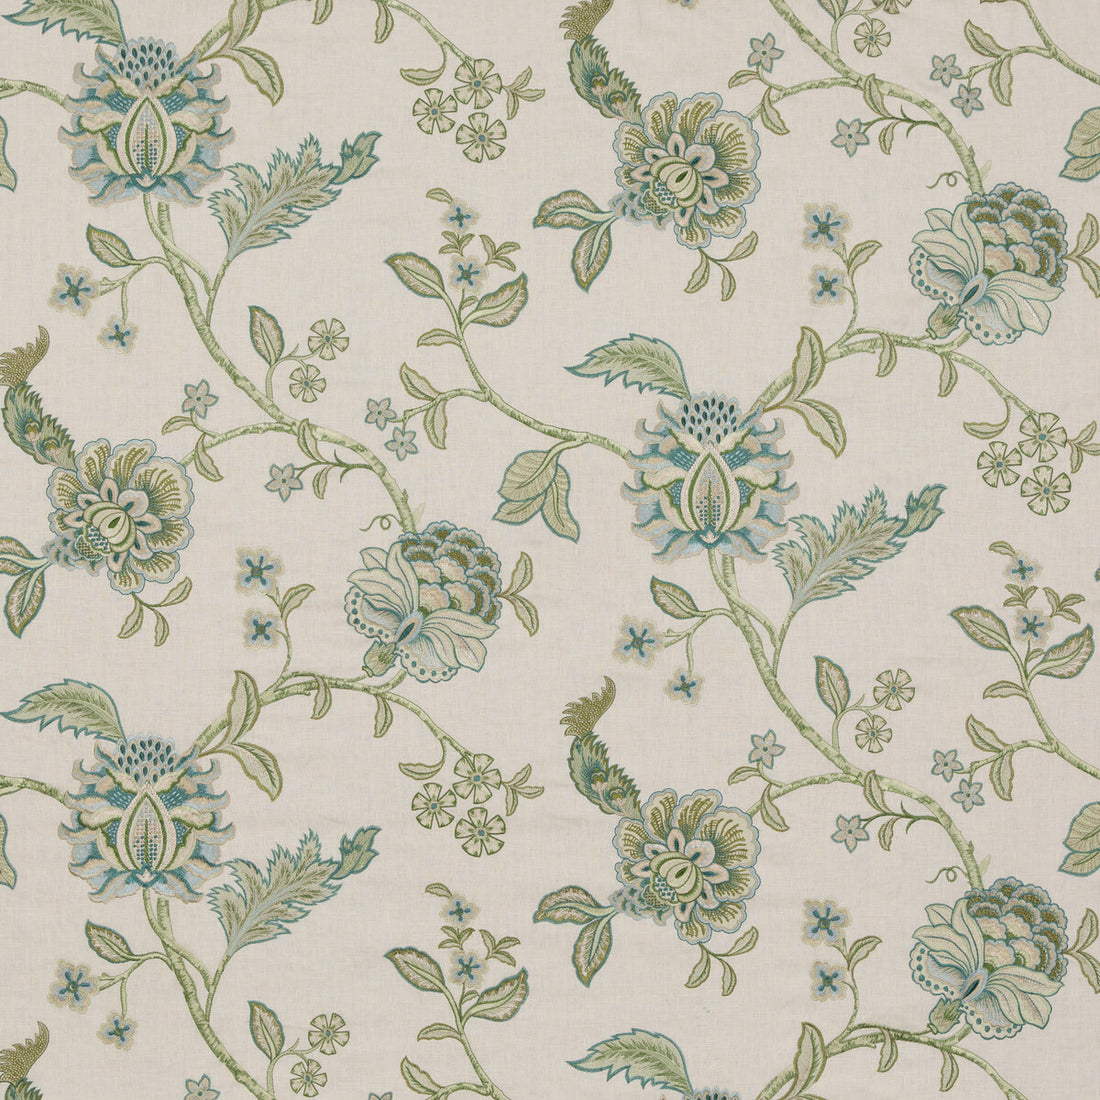 Sudbury fabric in teal color - pattern BF10937.2.0 - by G P &amp; J Baker in the Caspian collection